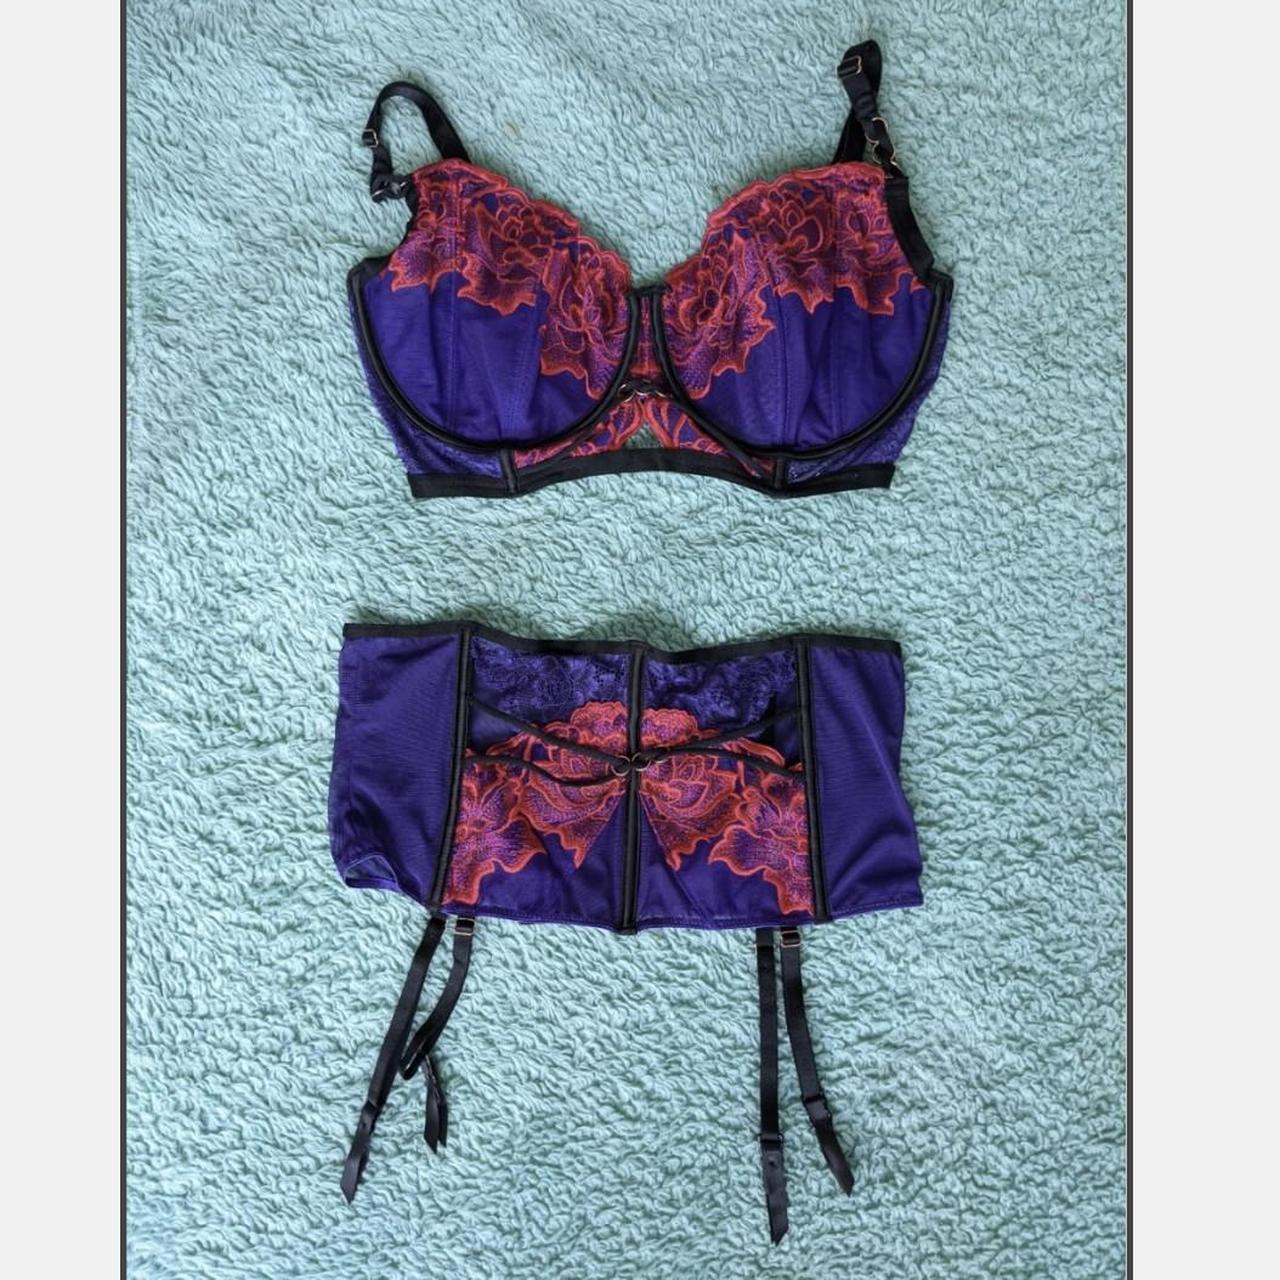 Ann Summers red and purple floral bra and suspender - Depop